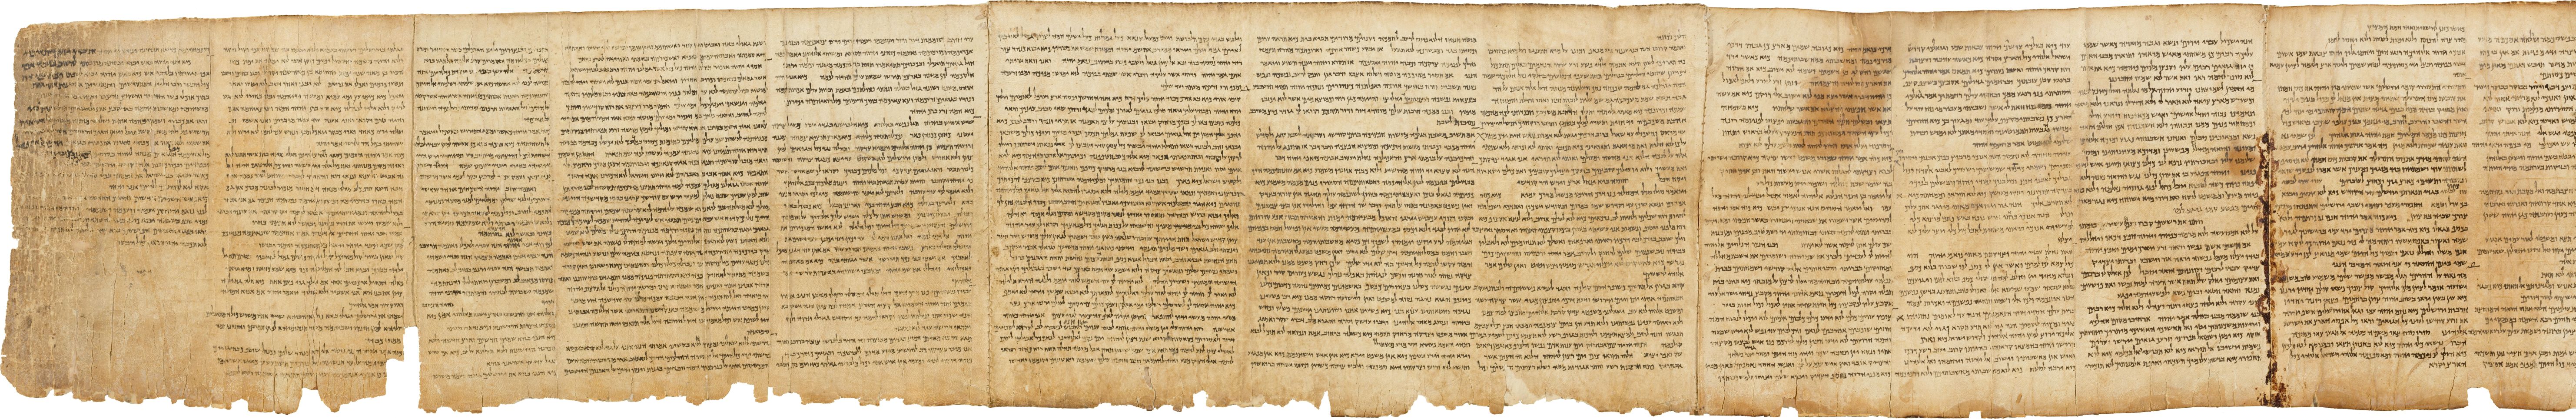 The end of the Great Isaiah Scroll from Qumran